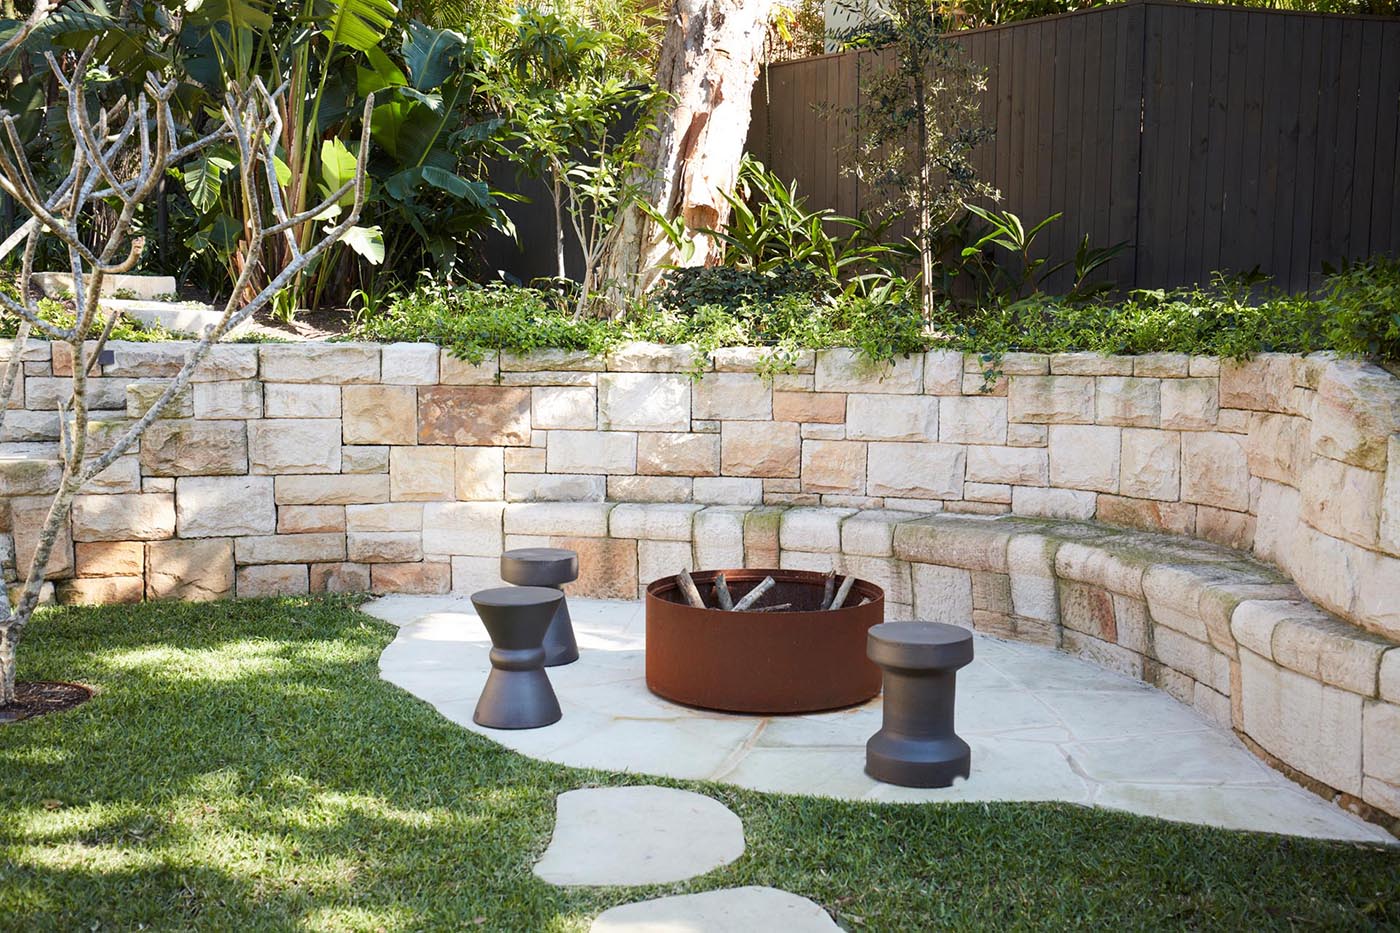 A sandstone wall incorporates seating around a fire pit, and includes steps that lead up to an upper level of the garden.